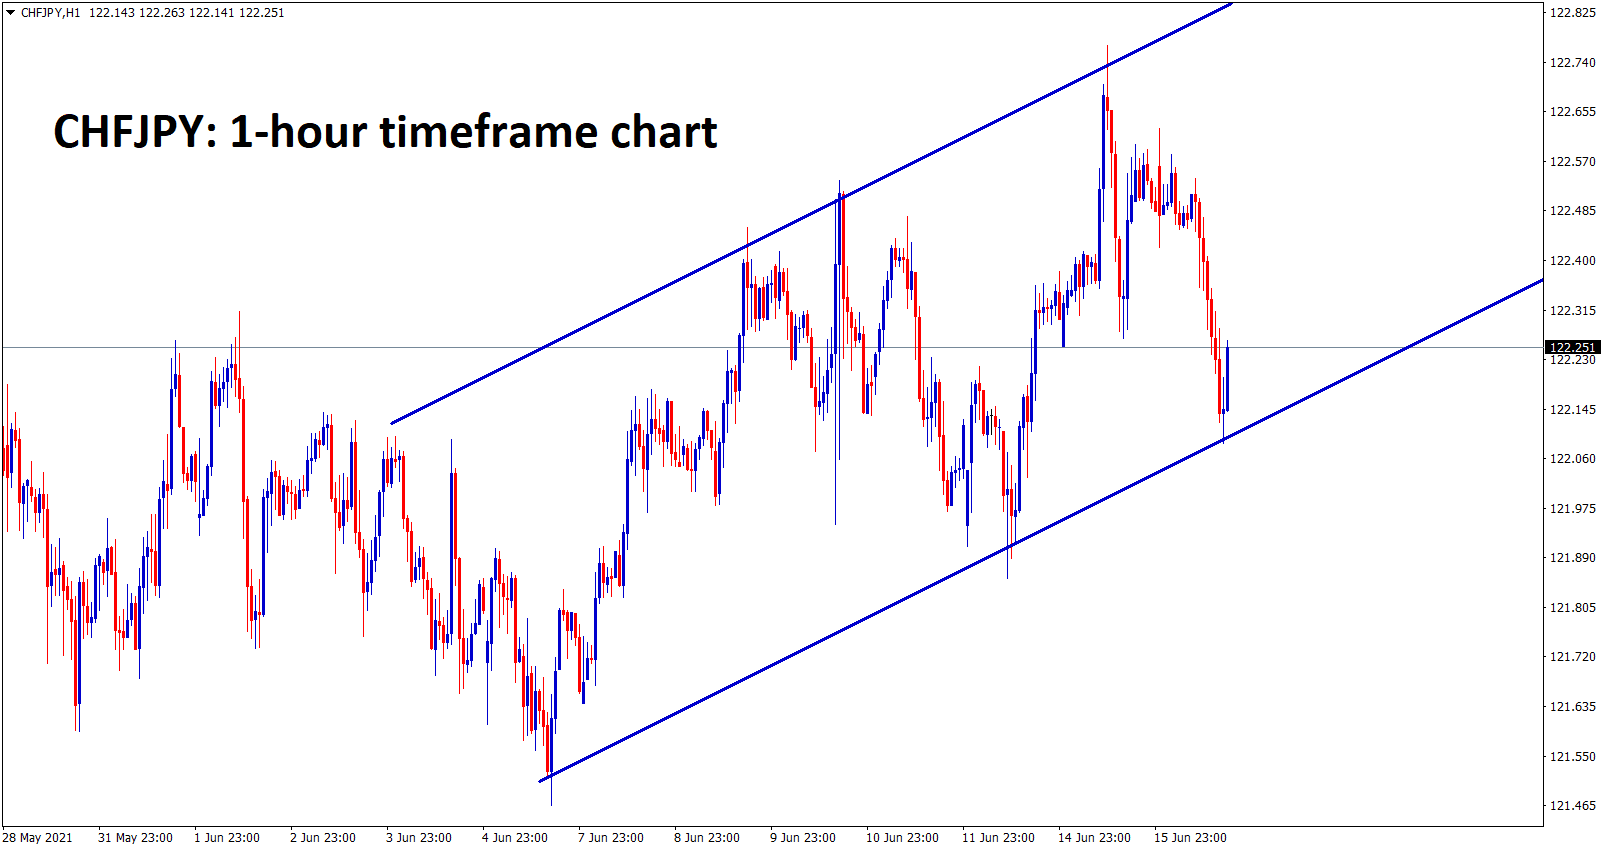 CHFJPY is moving in an Ascending Channel